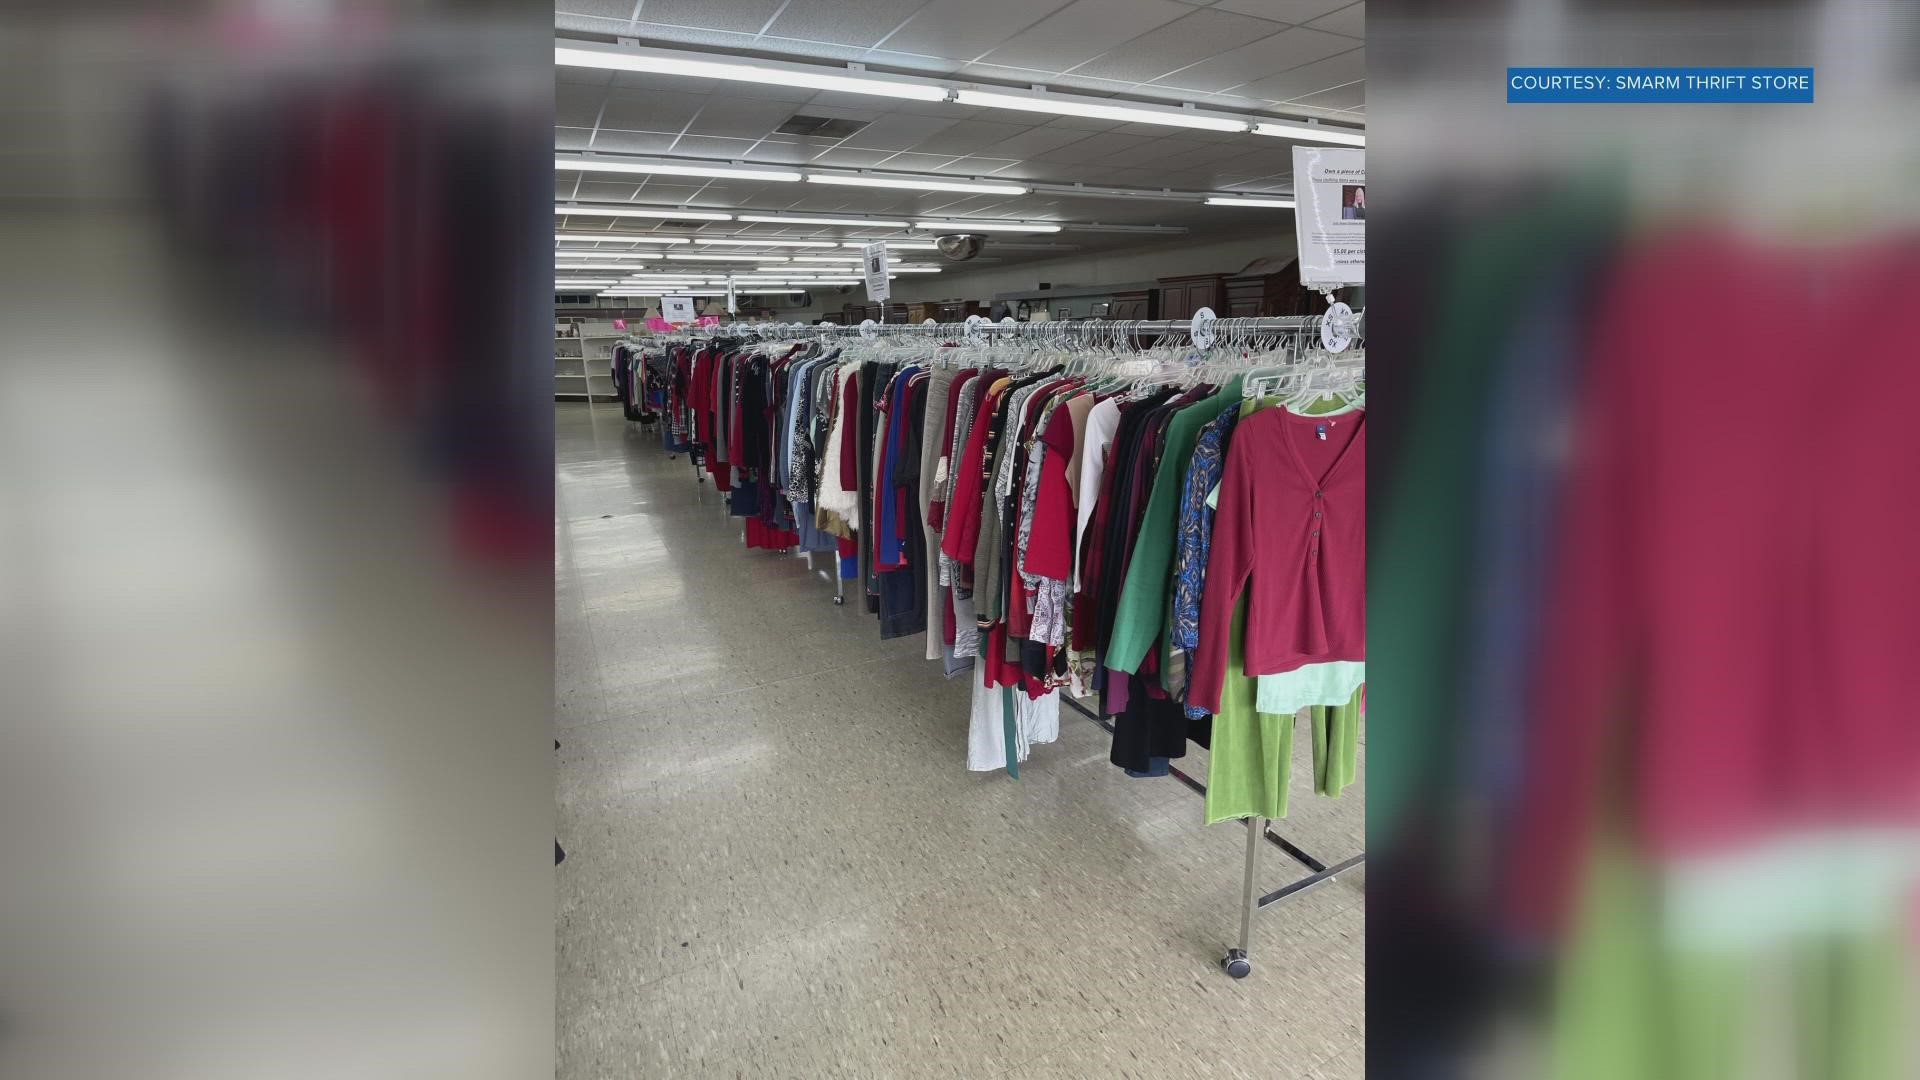 SMARM thrift store in Sevierville is selling clothing, household items, and furniture used to film Dolly Parton's Mountain Magic Christmas movie.